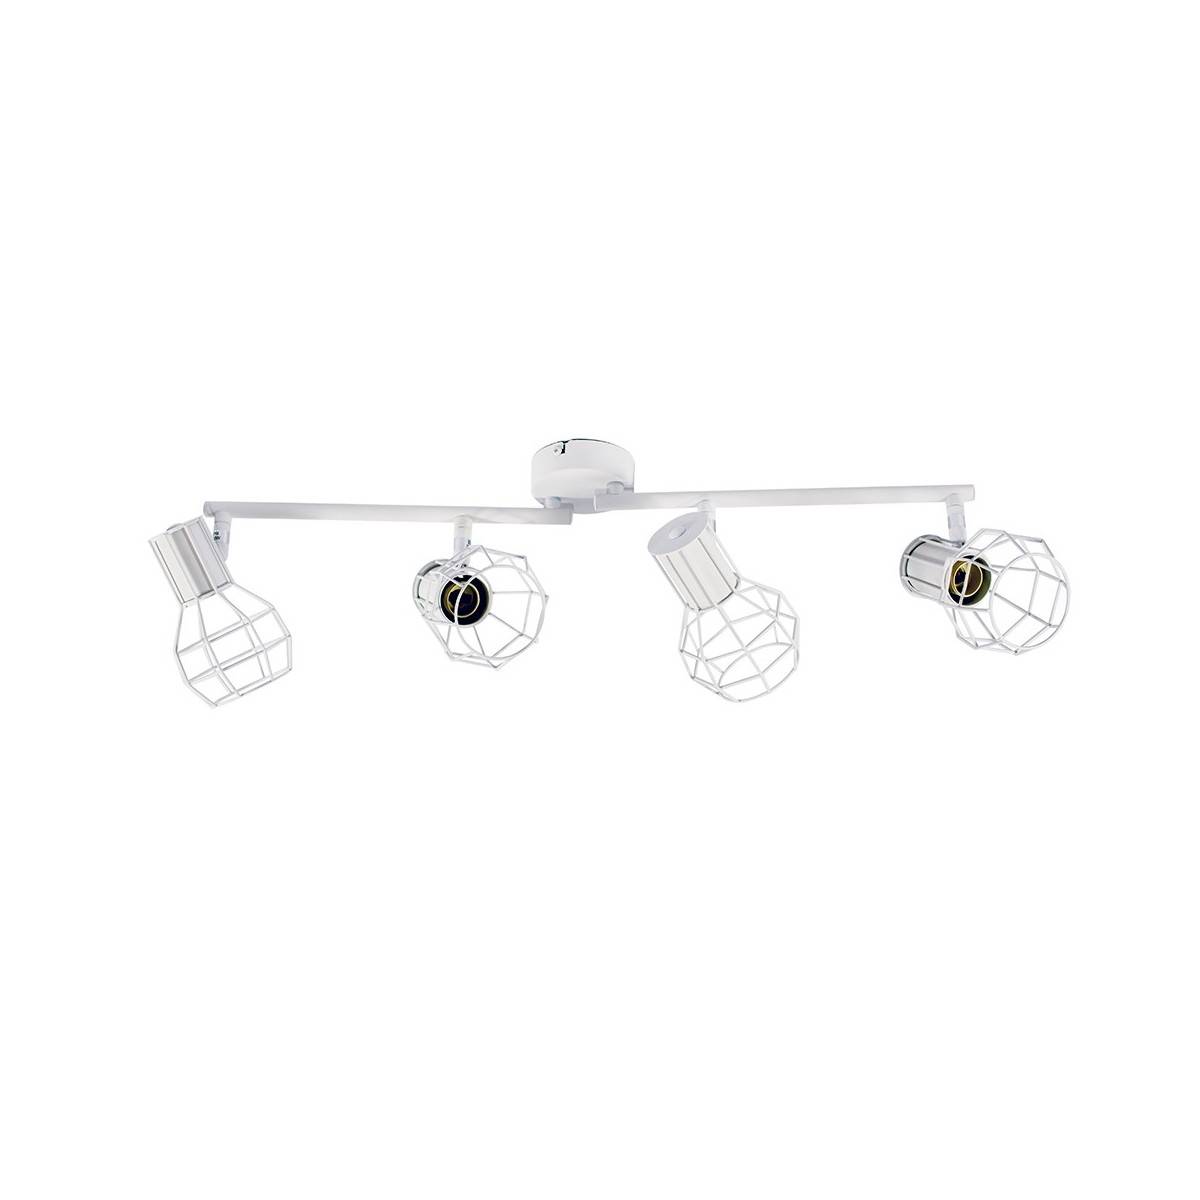 Cage ceiling lamp AZOR 4 points E14